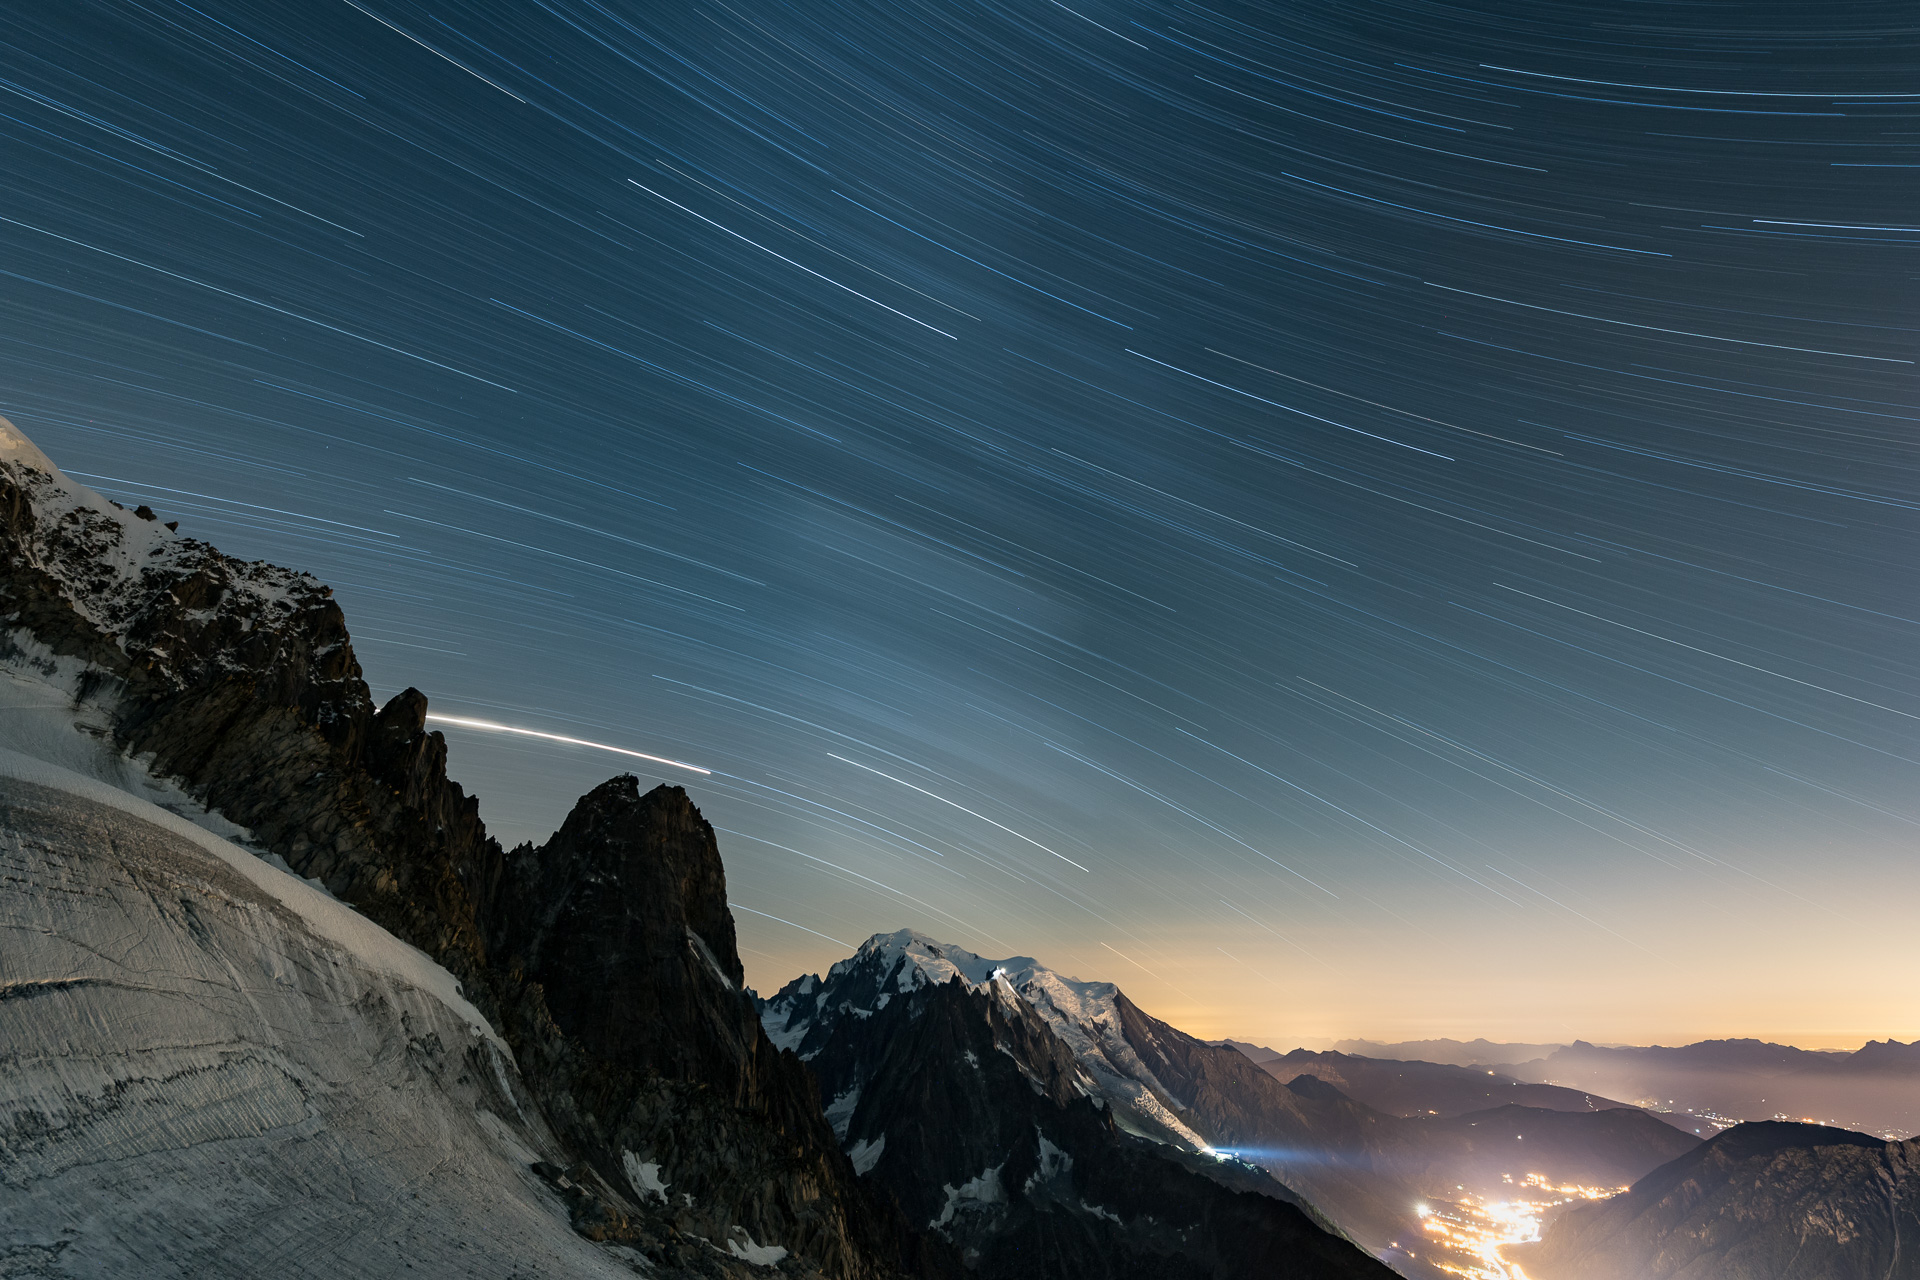 Astrophotography over the Mont Blanc and Chamonix in 2018